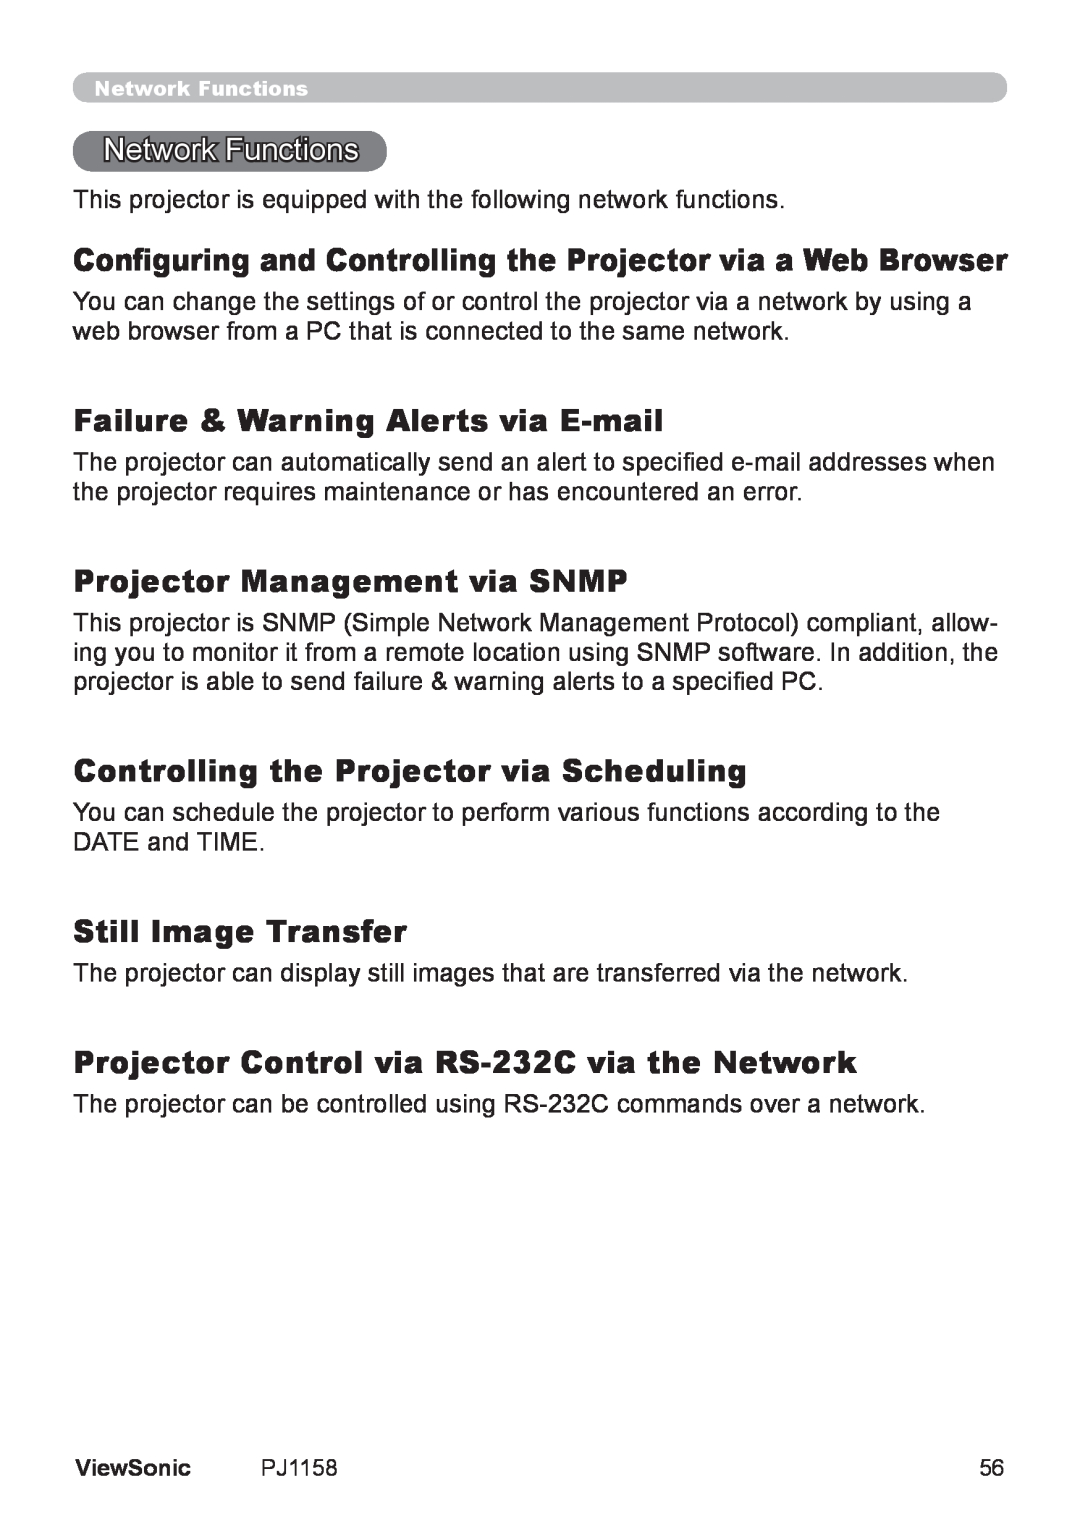 ViewSonic PJ1158 manual Network Functions, Failure & Warning Alerts via E-mail, Projector Management via SNMP 